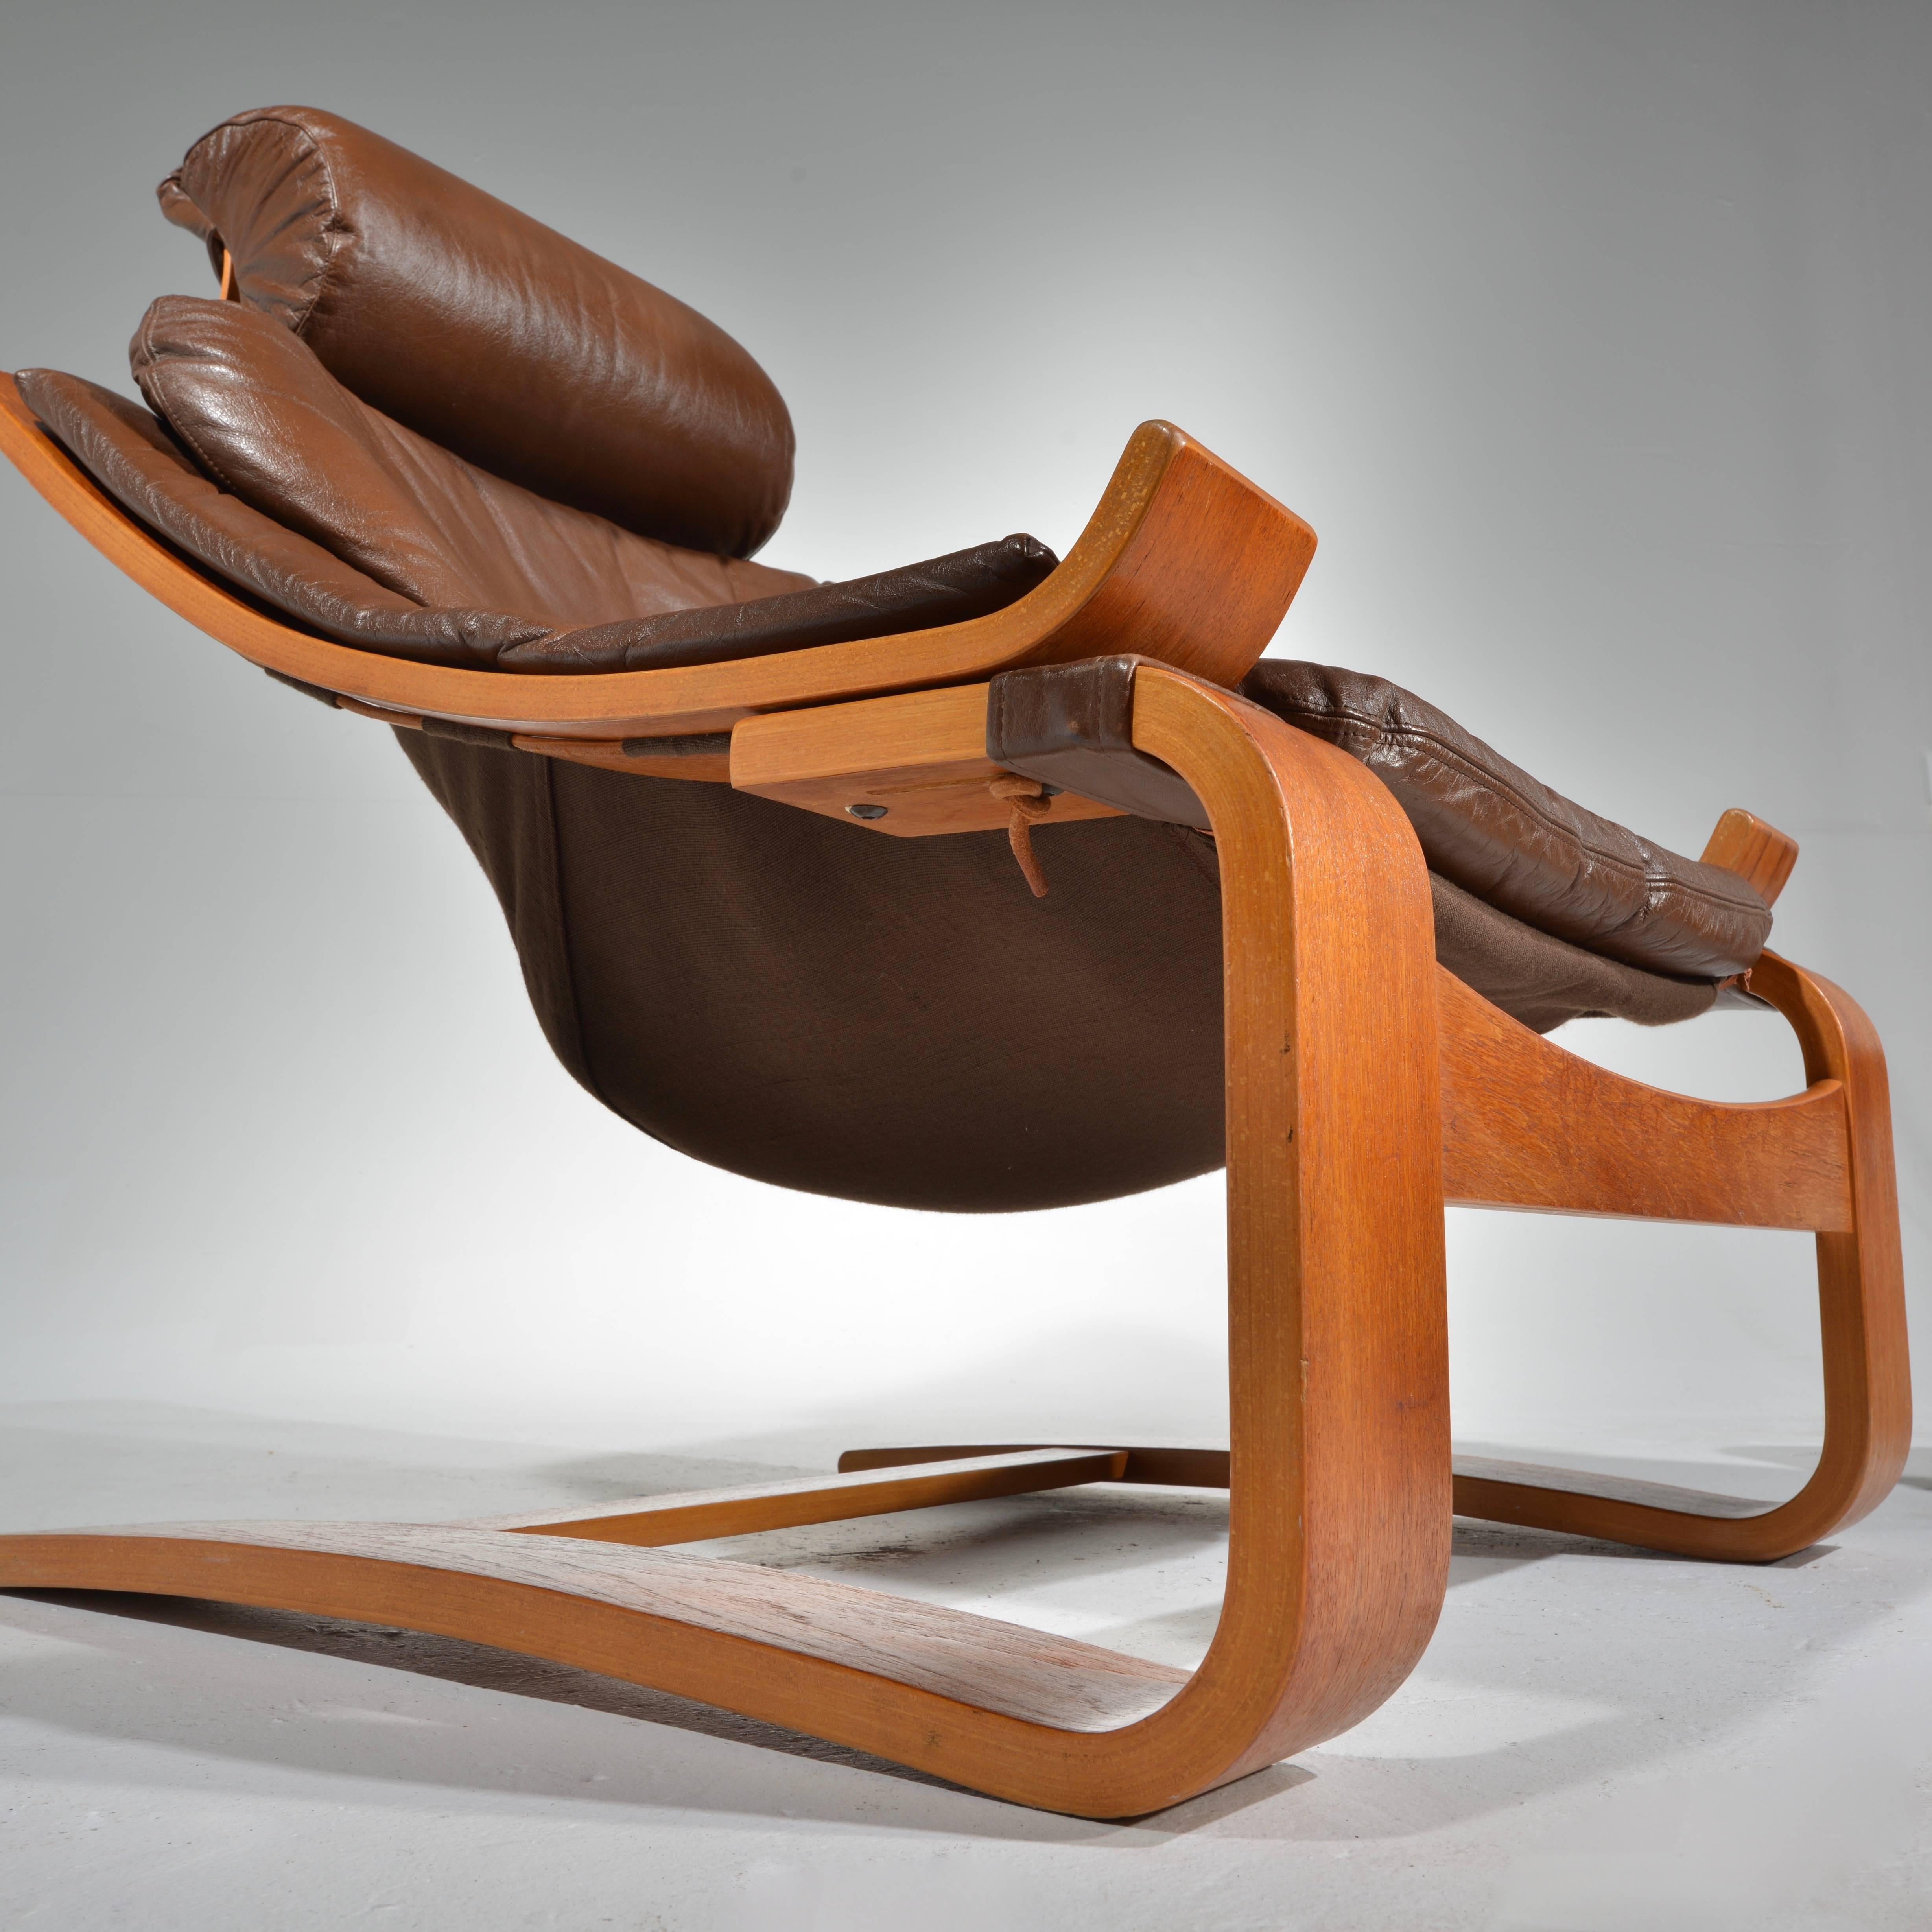 Kroken Teak and Leather Lounge Chair and Stool by Ake Fribytter for Nelo, Sweden 1